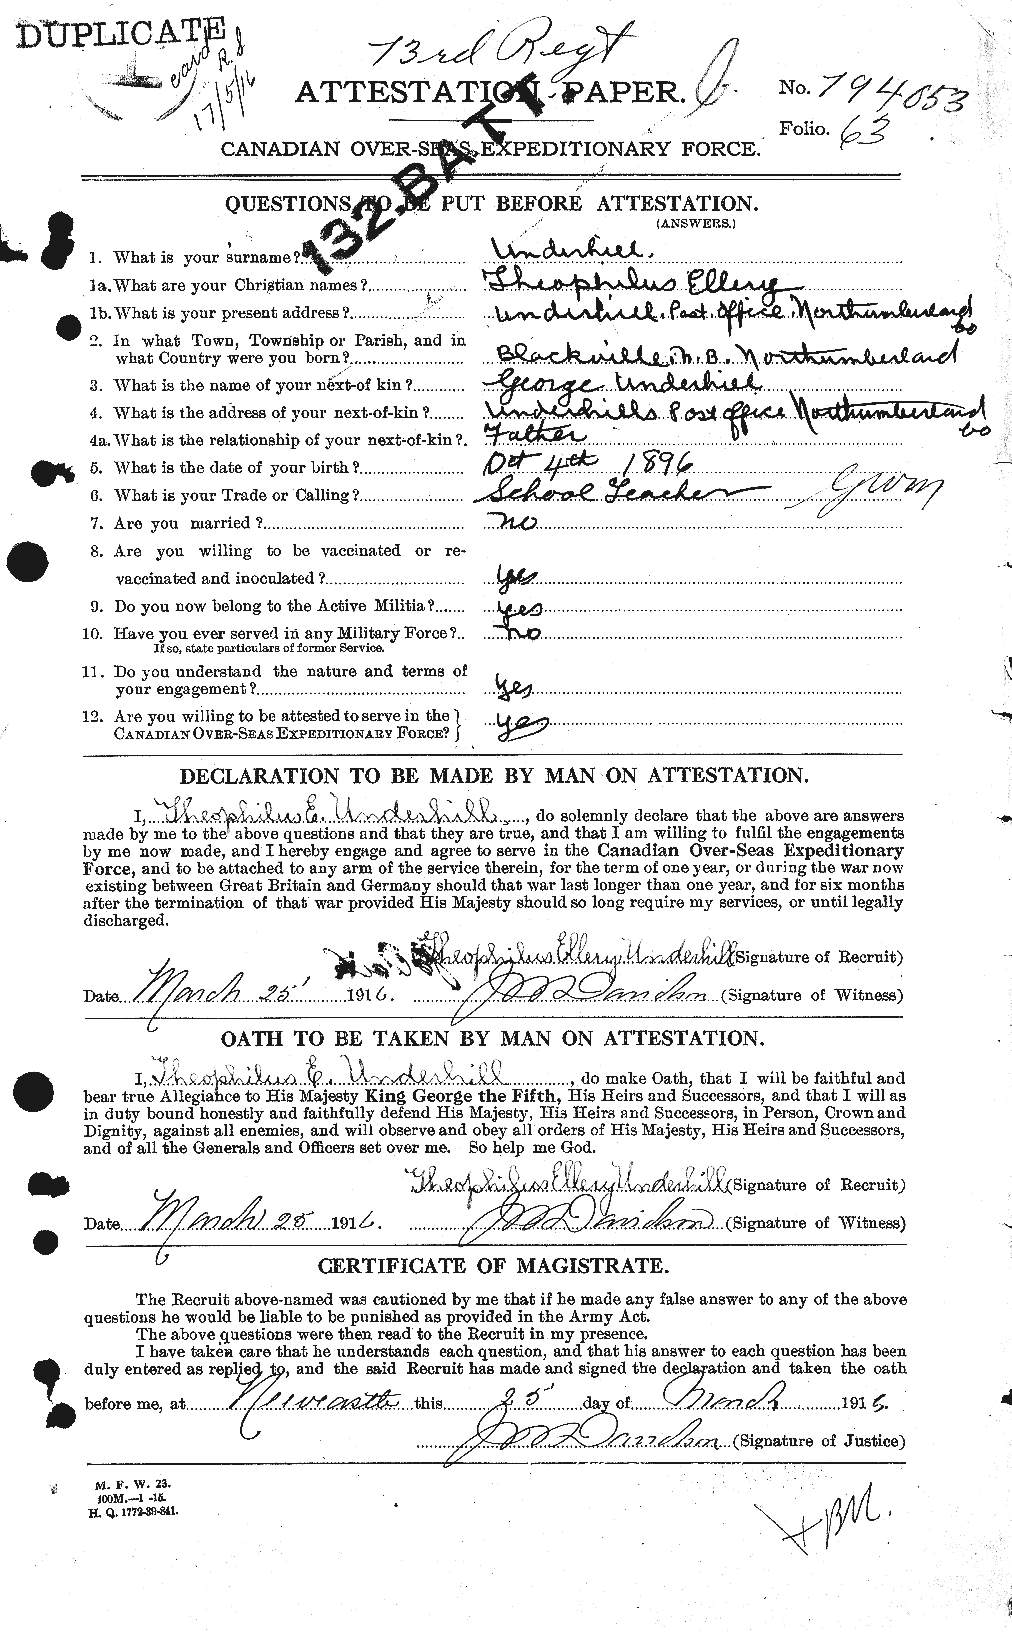 Personnel Records of the First World War - CEF 647116a